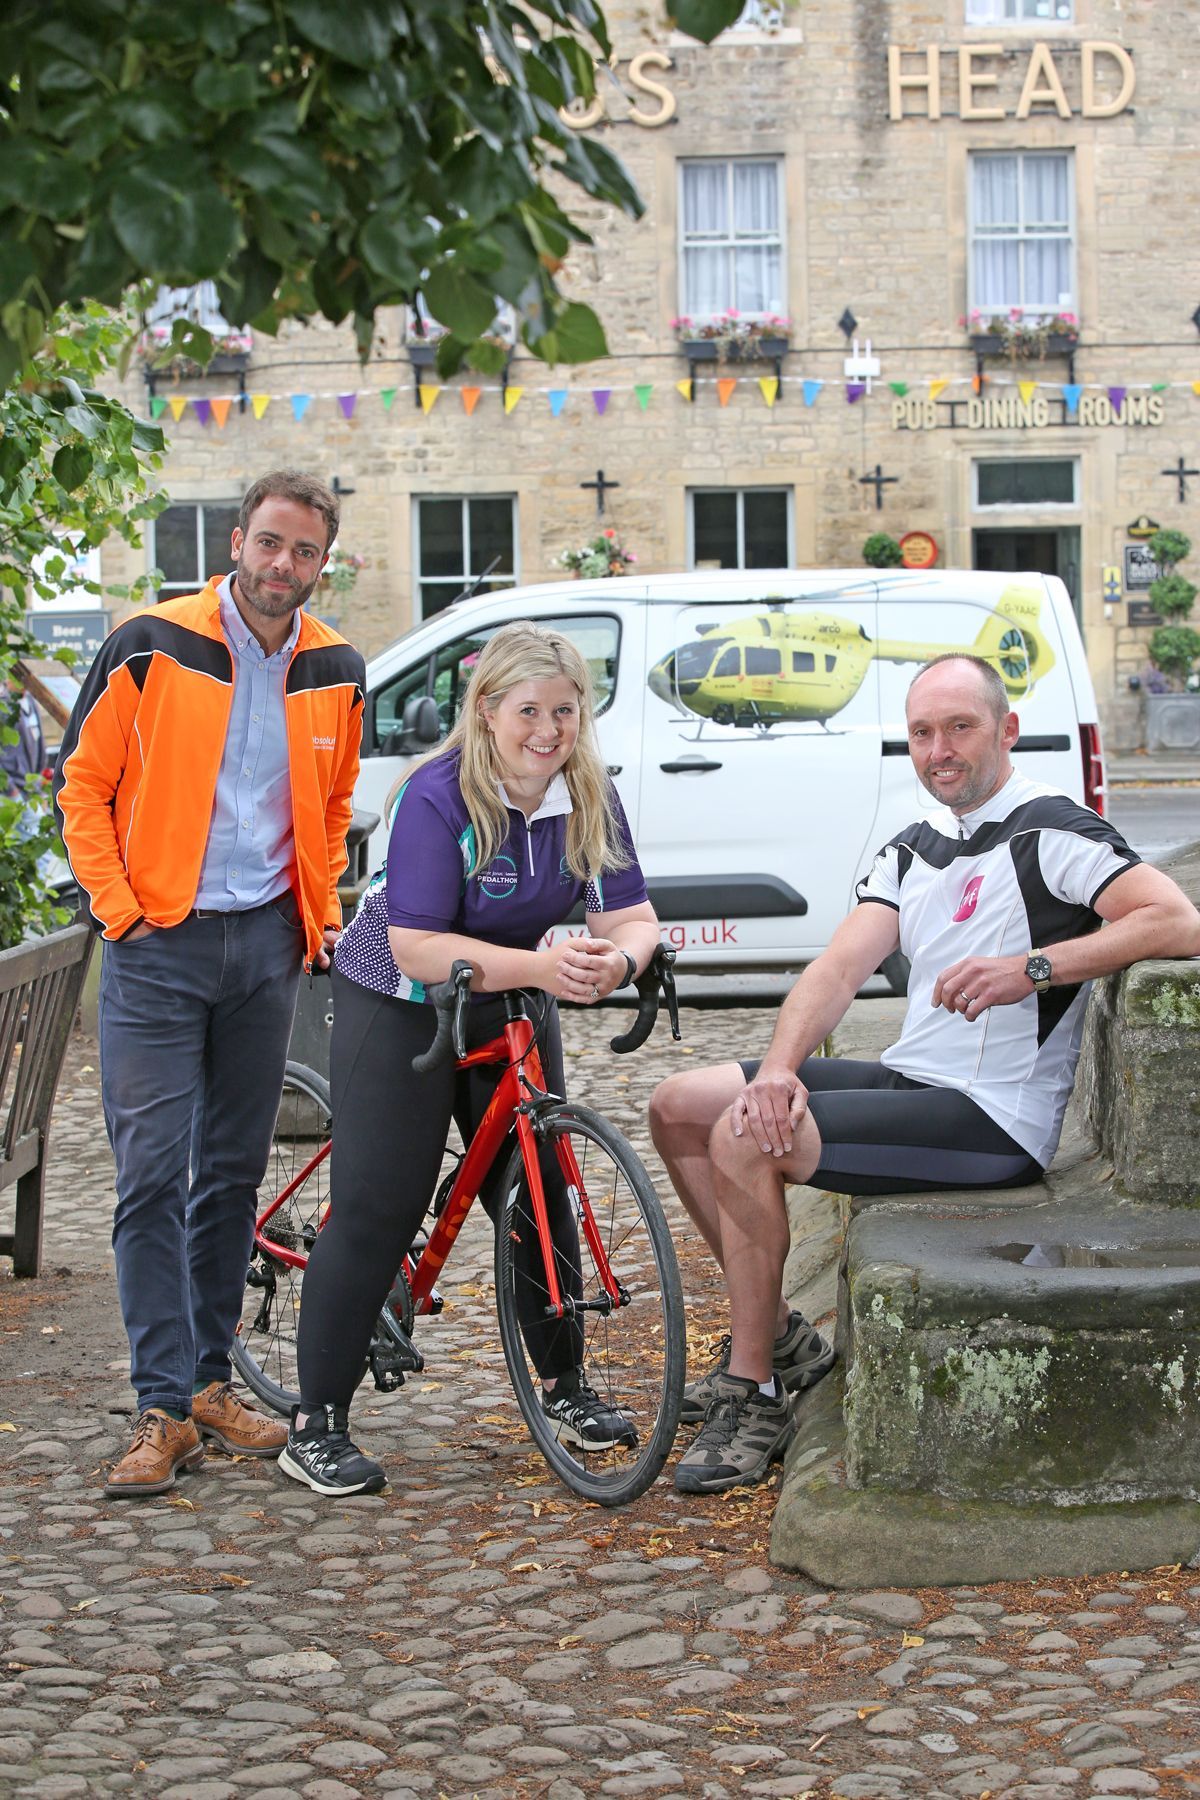 Business sponsors confirmed for charity bike ride